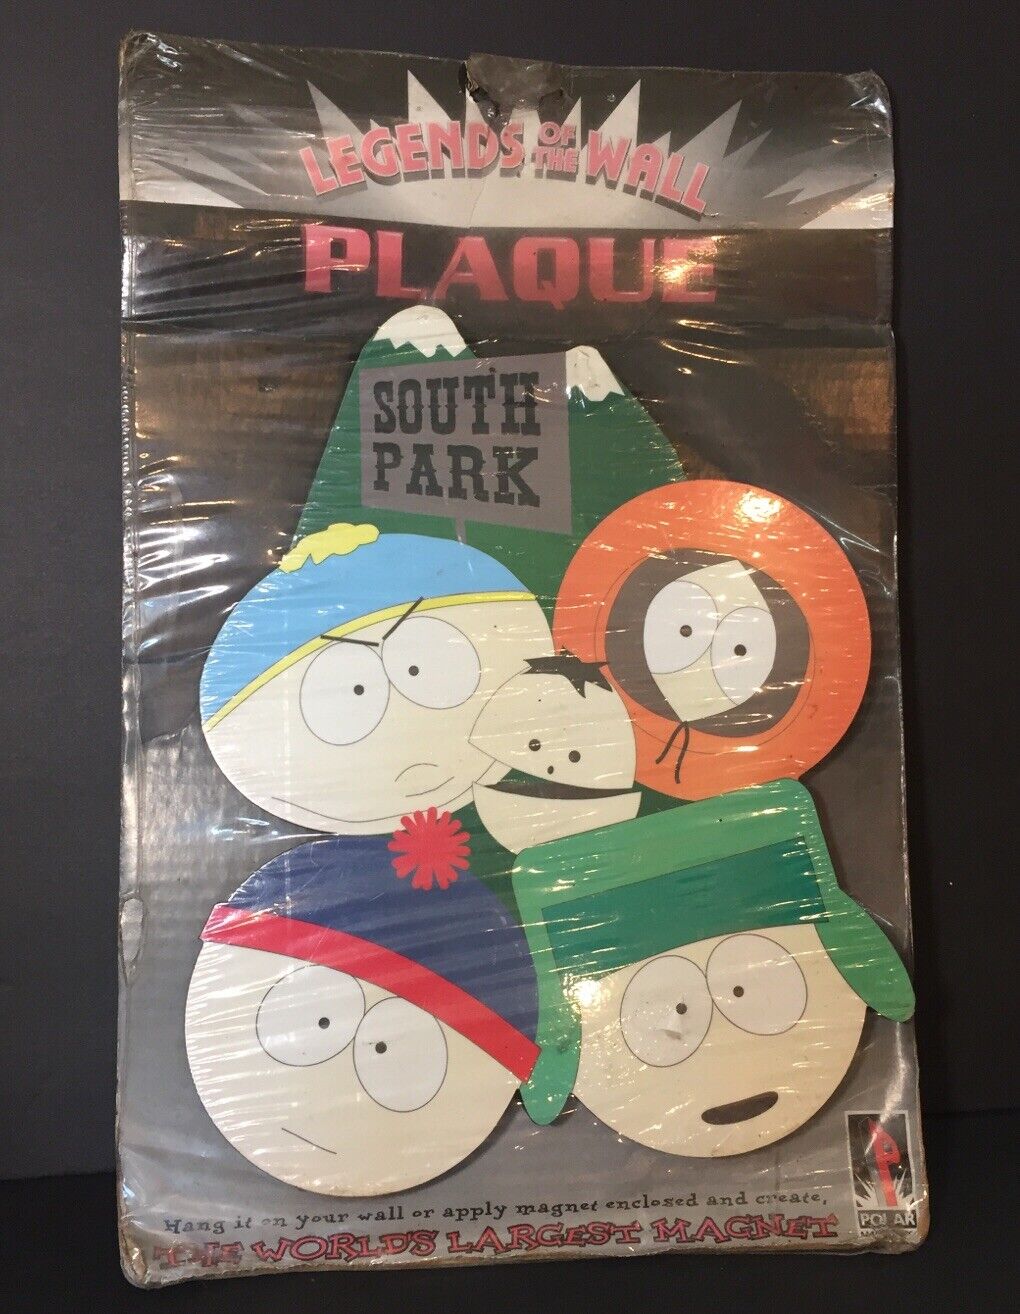 South Park 1997 Vintage Group With Ike Legends Of The Wall Plaque Factory Sealed